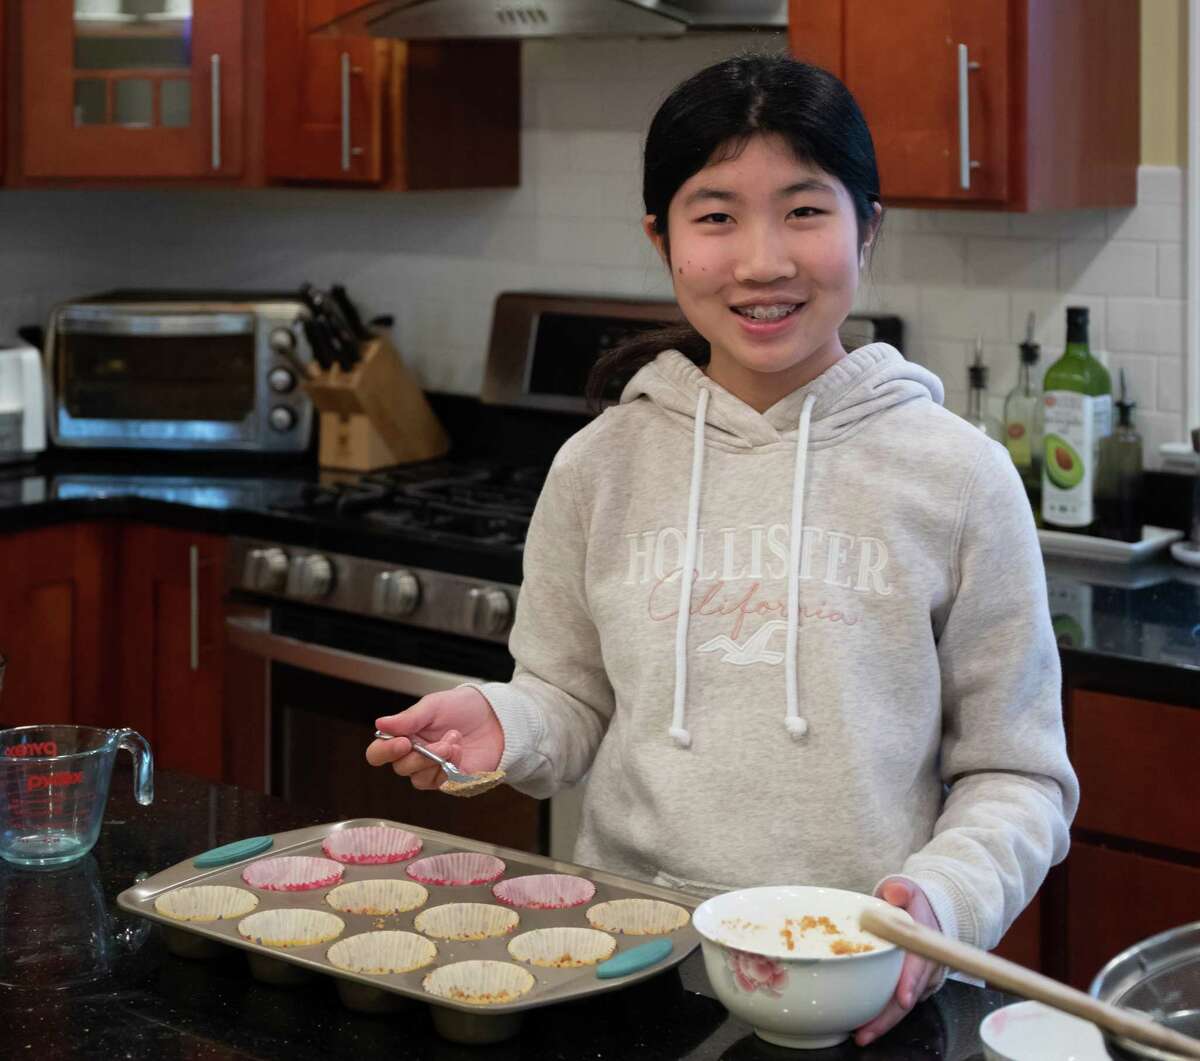 Annabelle Zheng, a seventh grader at Middlebrook School, bakes mini raspberry cheesecakes at home in Wilton, Ct. May 2020